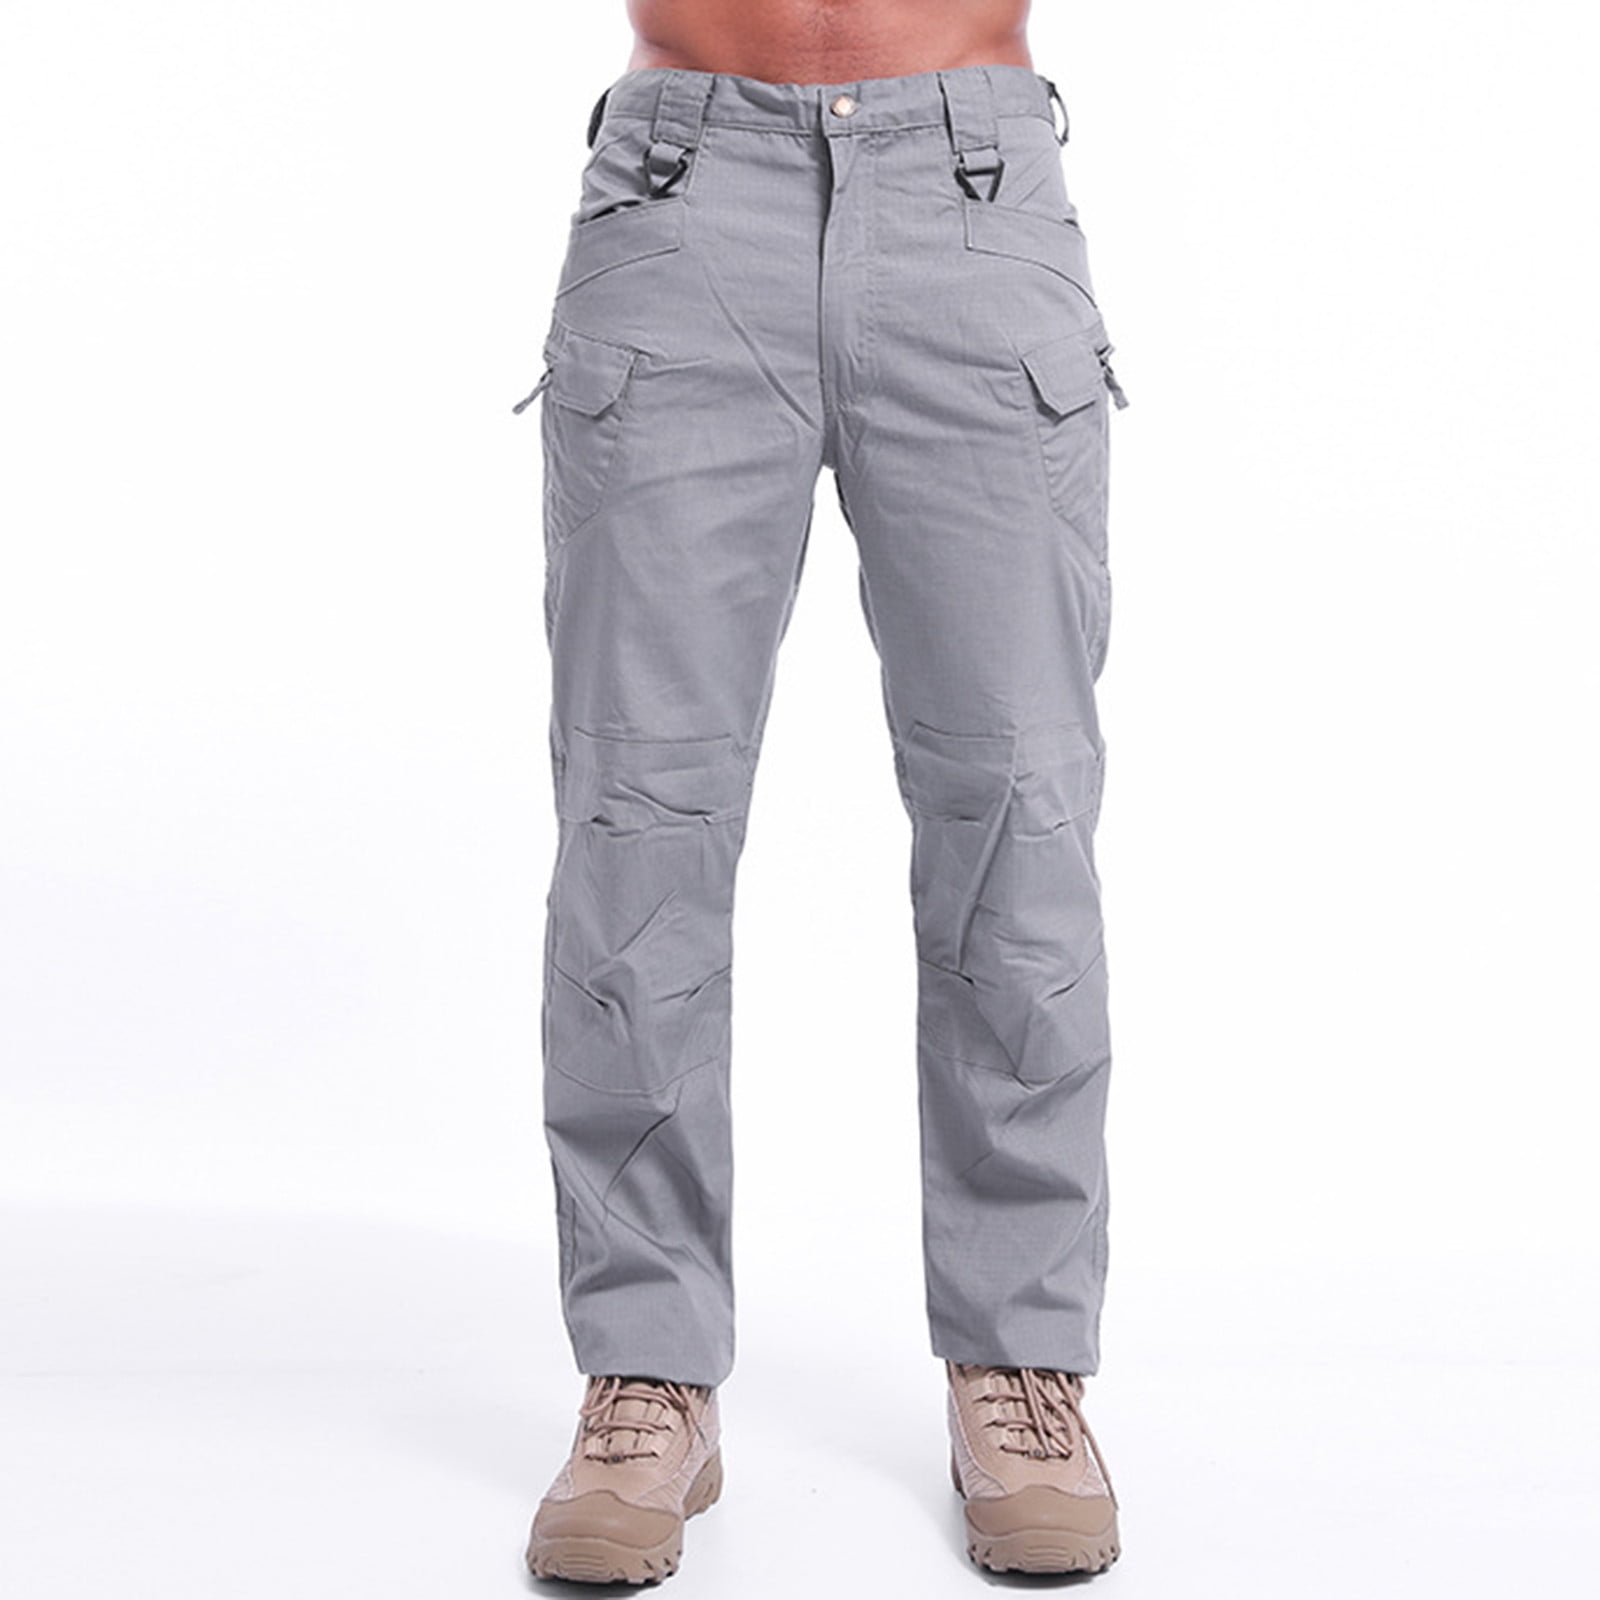 Mens Cotton Jogger Pants With Zipper Design For Gym, Workout, And Fitness  Casual Fashion Skinny Track Camouflage Trousers Style 276c From Iklpz,  $30.28 | DHgate.Com